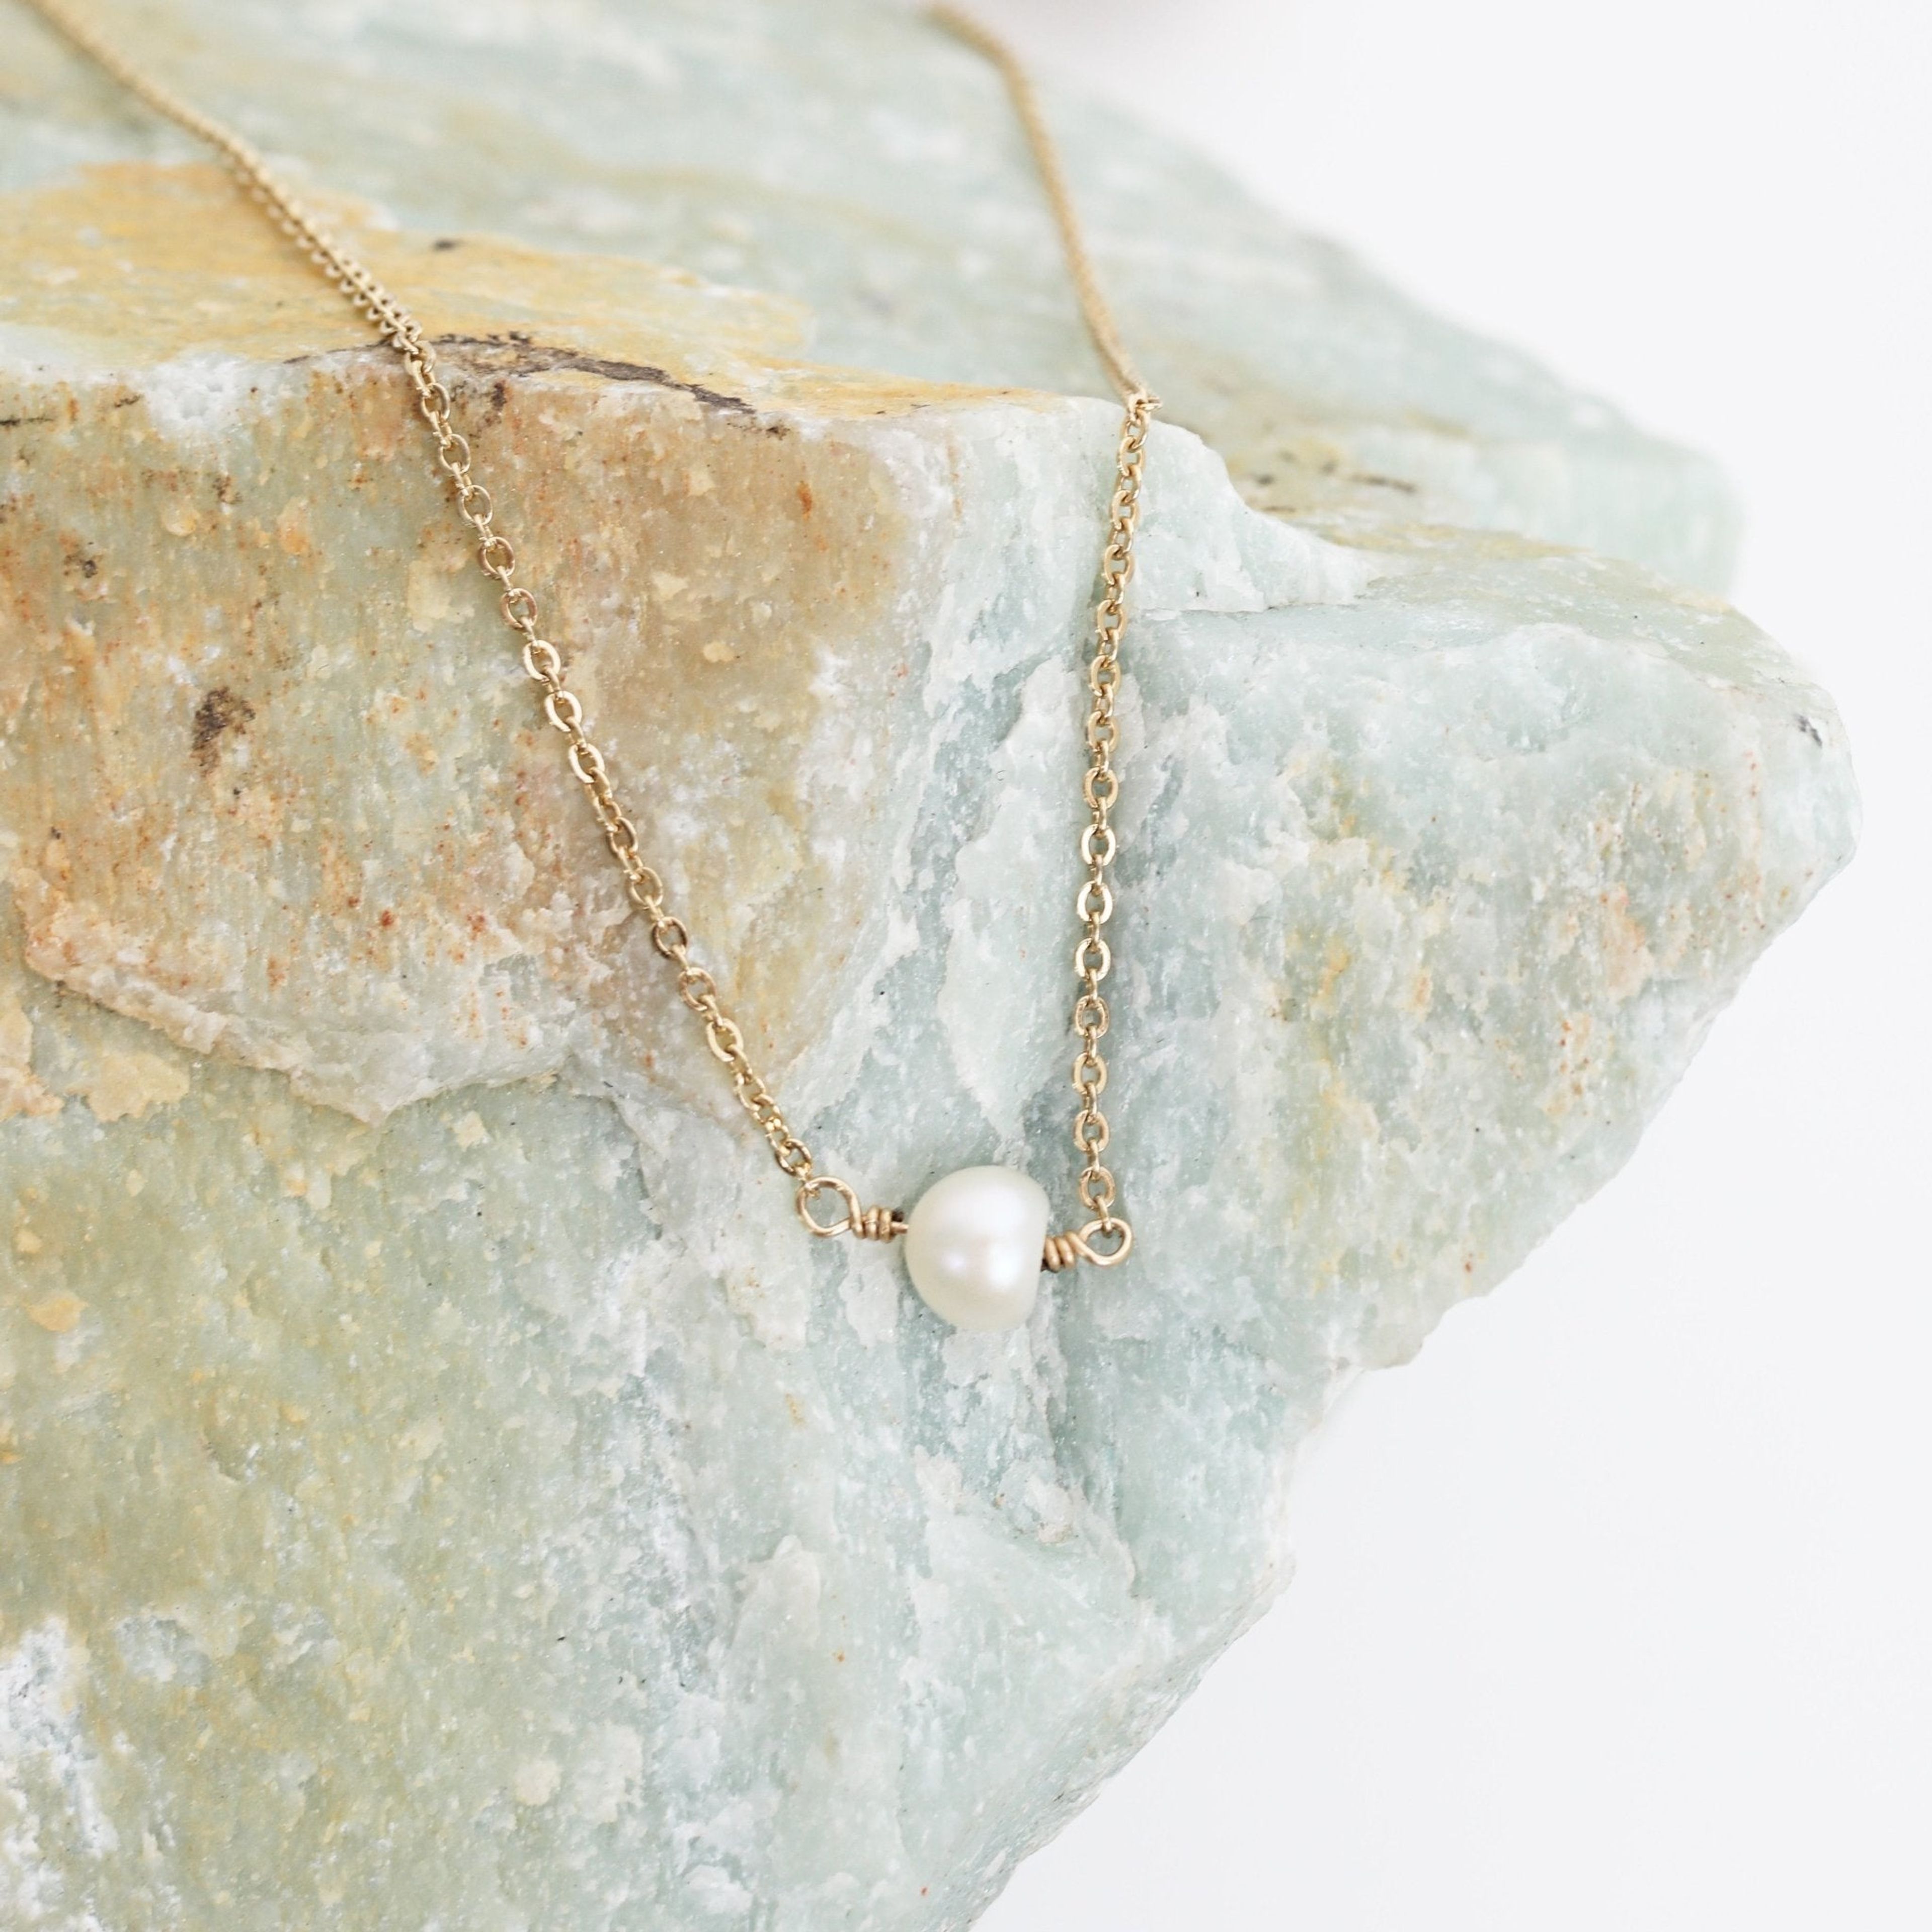 "The Small Pearl" Solitaire Freshwater Pearl Necklace